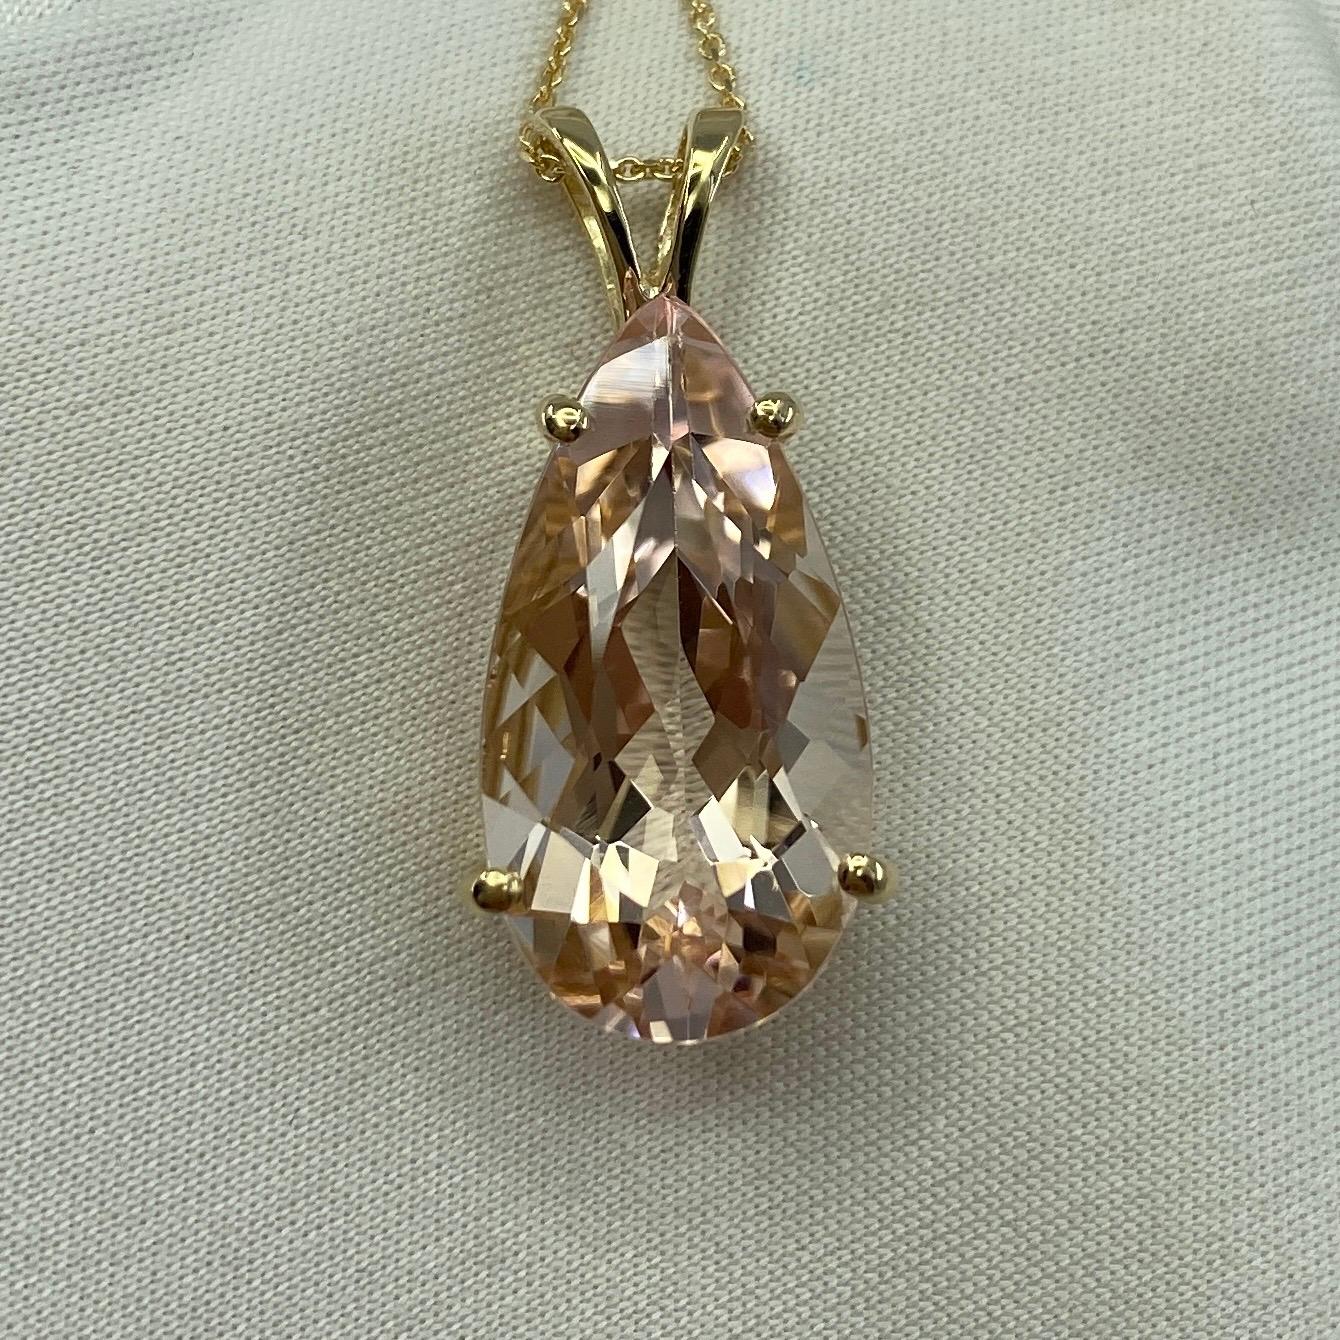 Fine Morganite Pear Cut Yellow Gold Pendant Necklace.

Beautiful 8.57 carat peach pink morganite set in a 14k yellow gold solitaire pendant.
Stunning morganite with a beautiful peach pink colour and excellent clarity, practically flawless.

It also